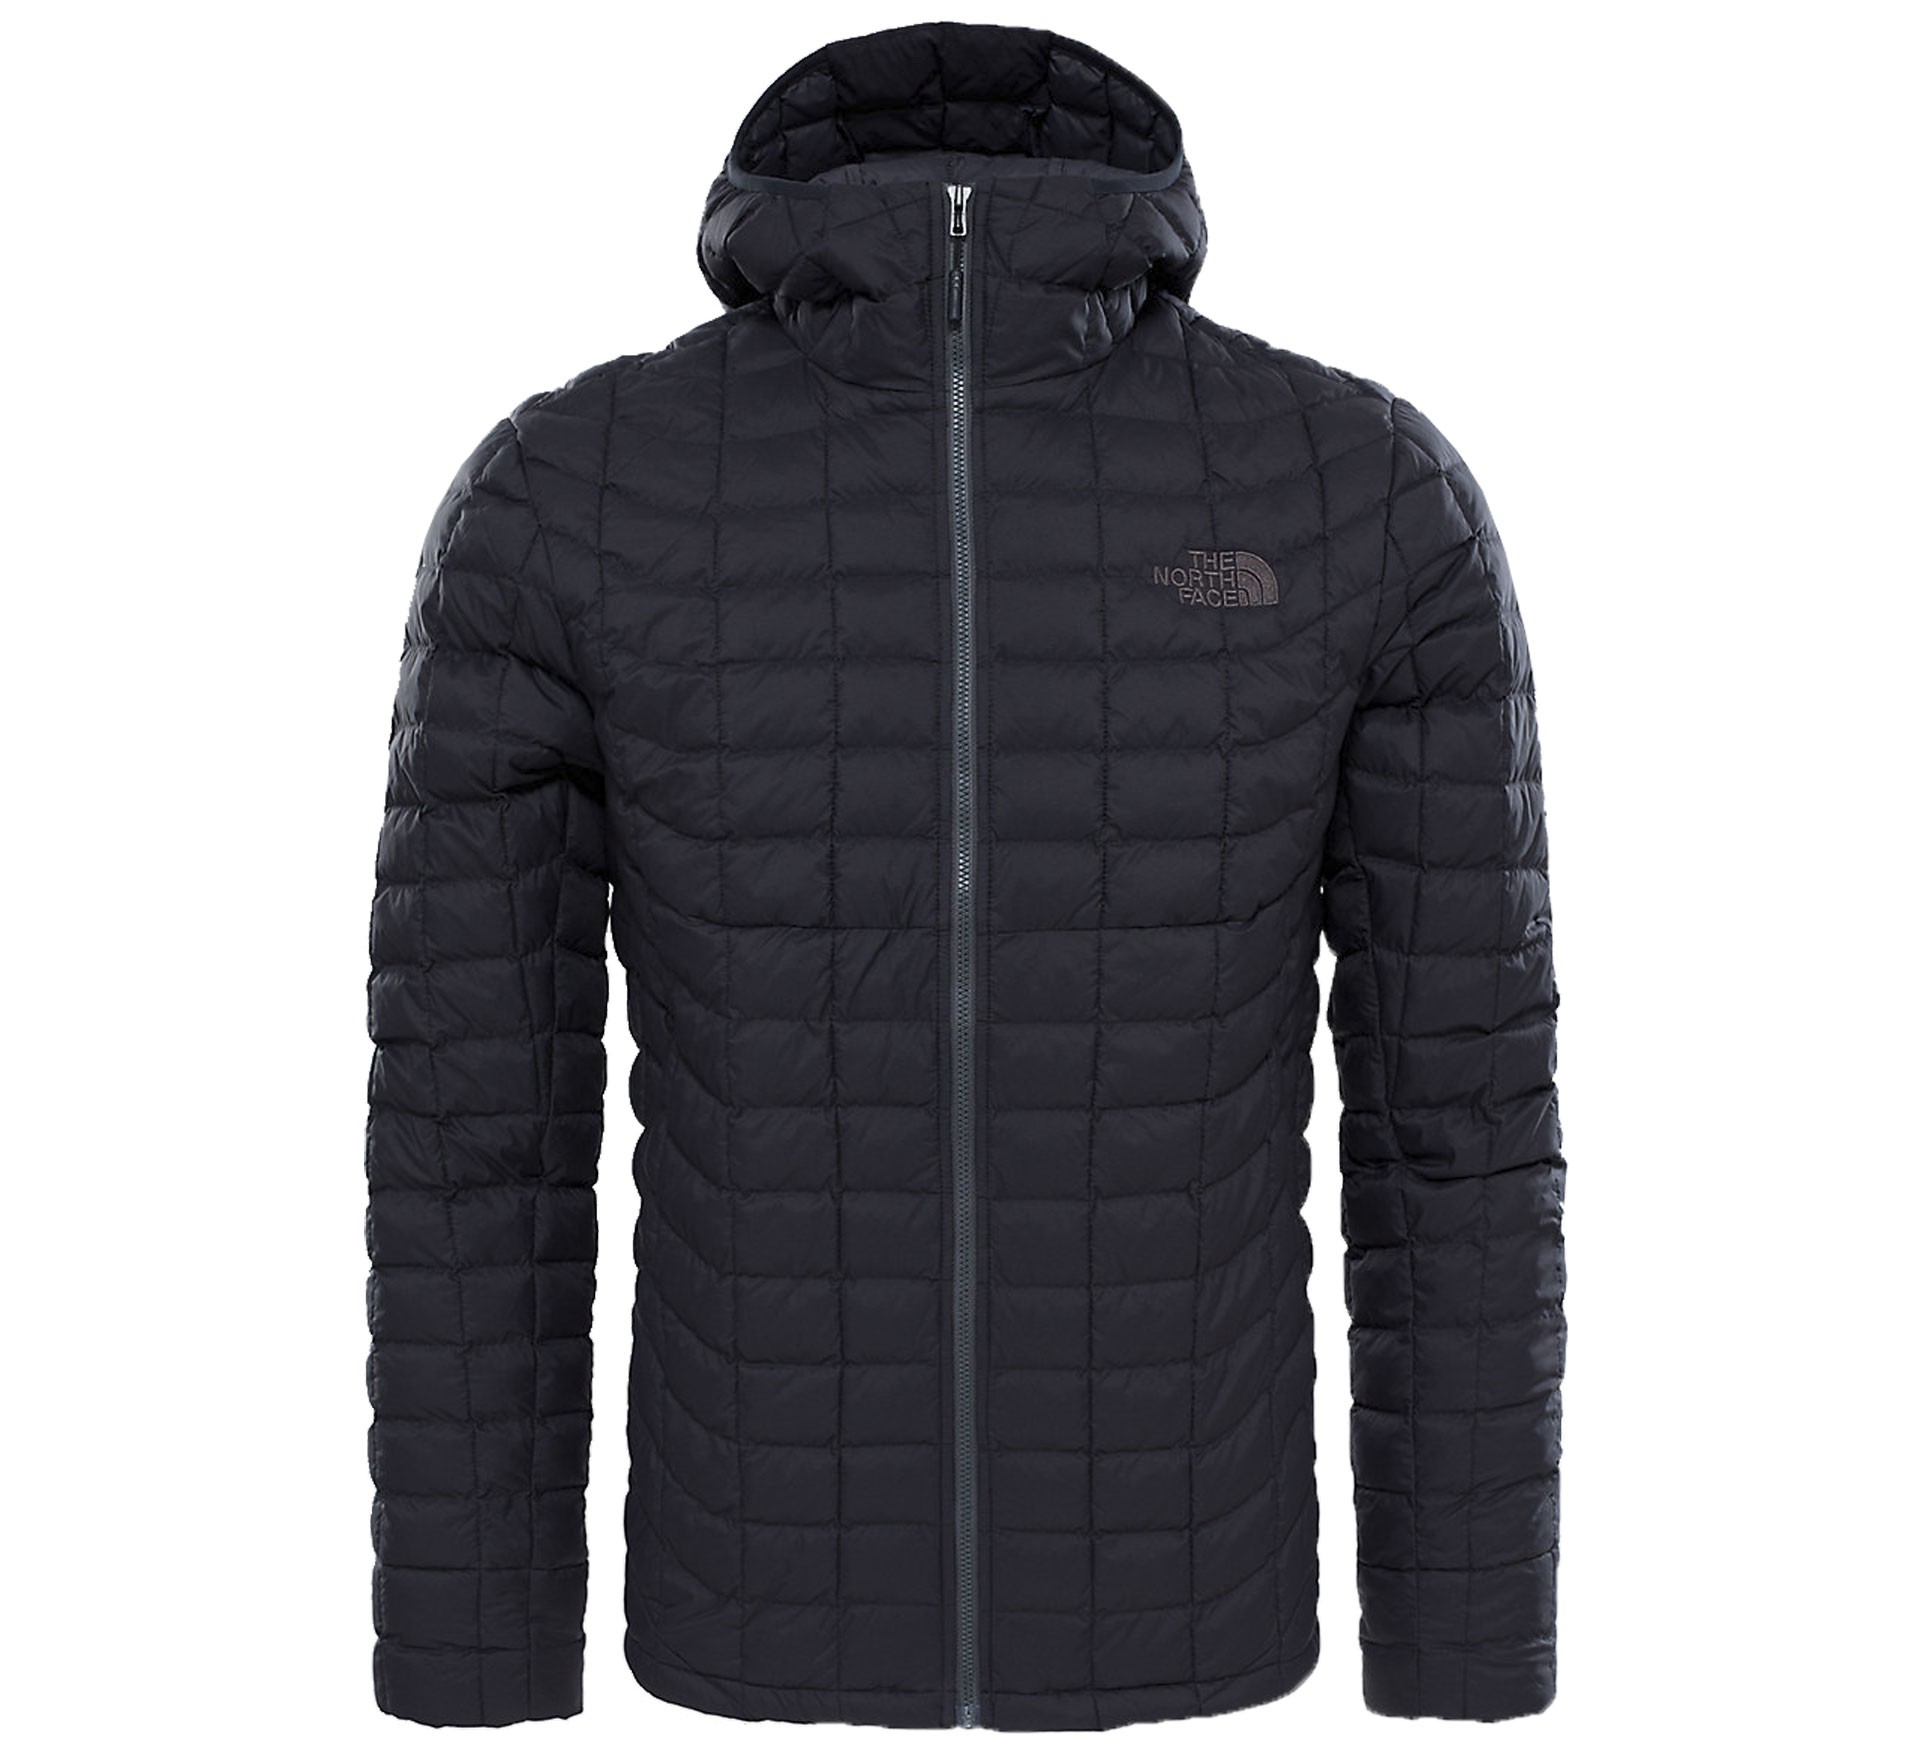 Plutosport - The North Face Thermoball Hooded Jacket